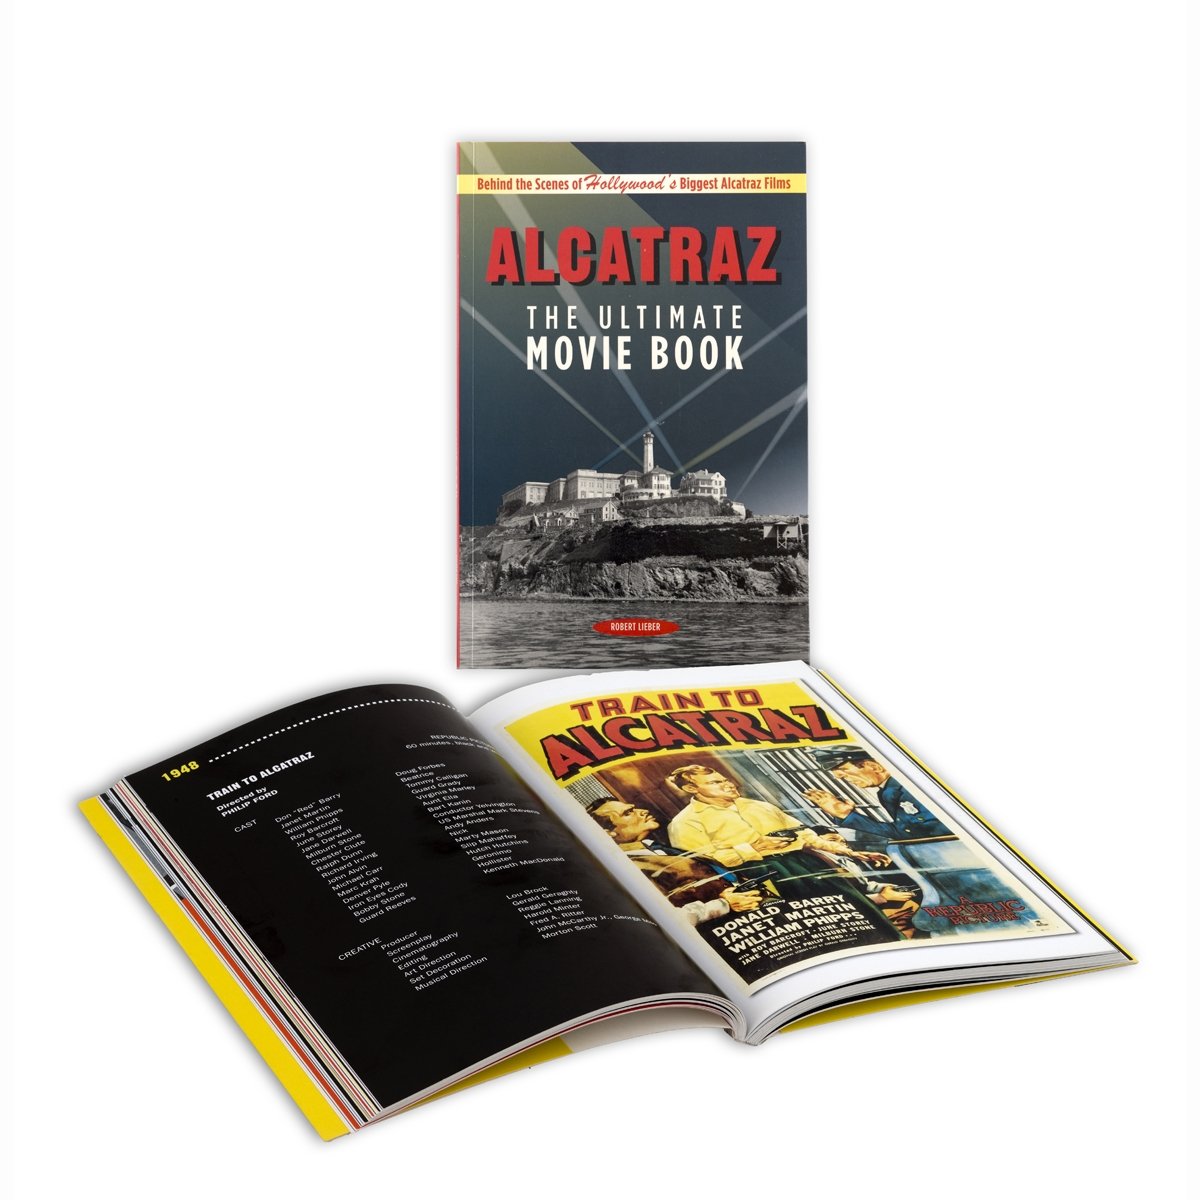 Alcatraz: The Ultimate Movie Book by Robert Lieber, featuring facts and quotes from famous films about the Rock.